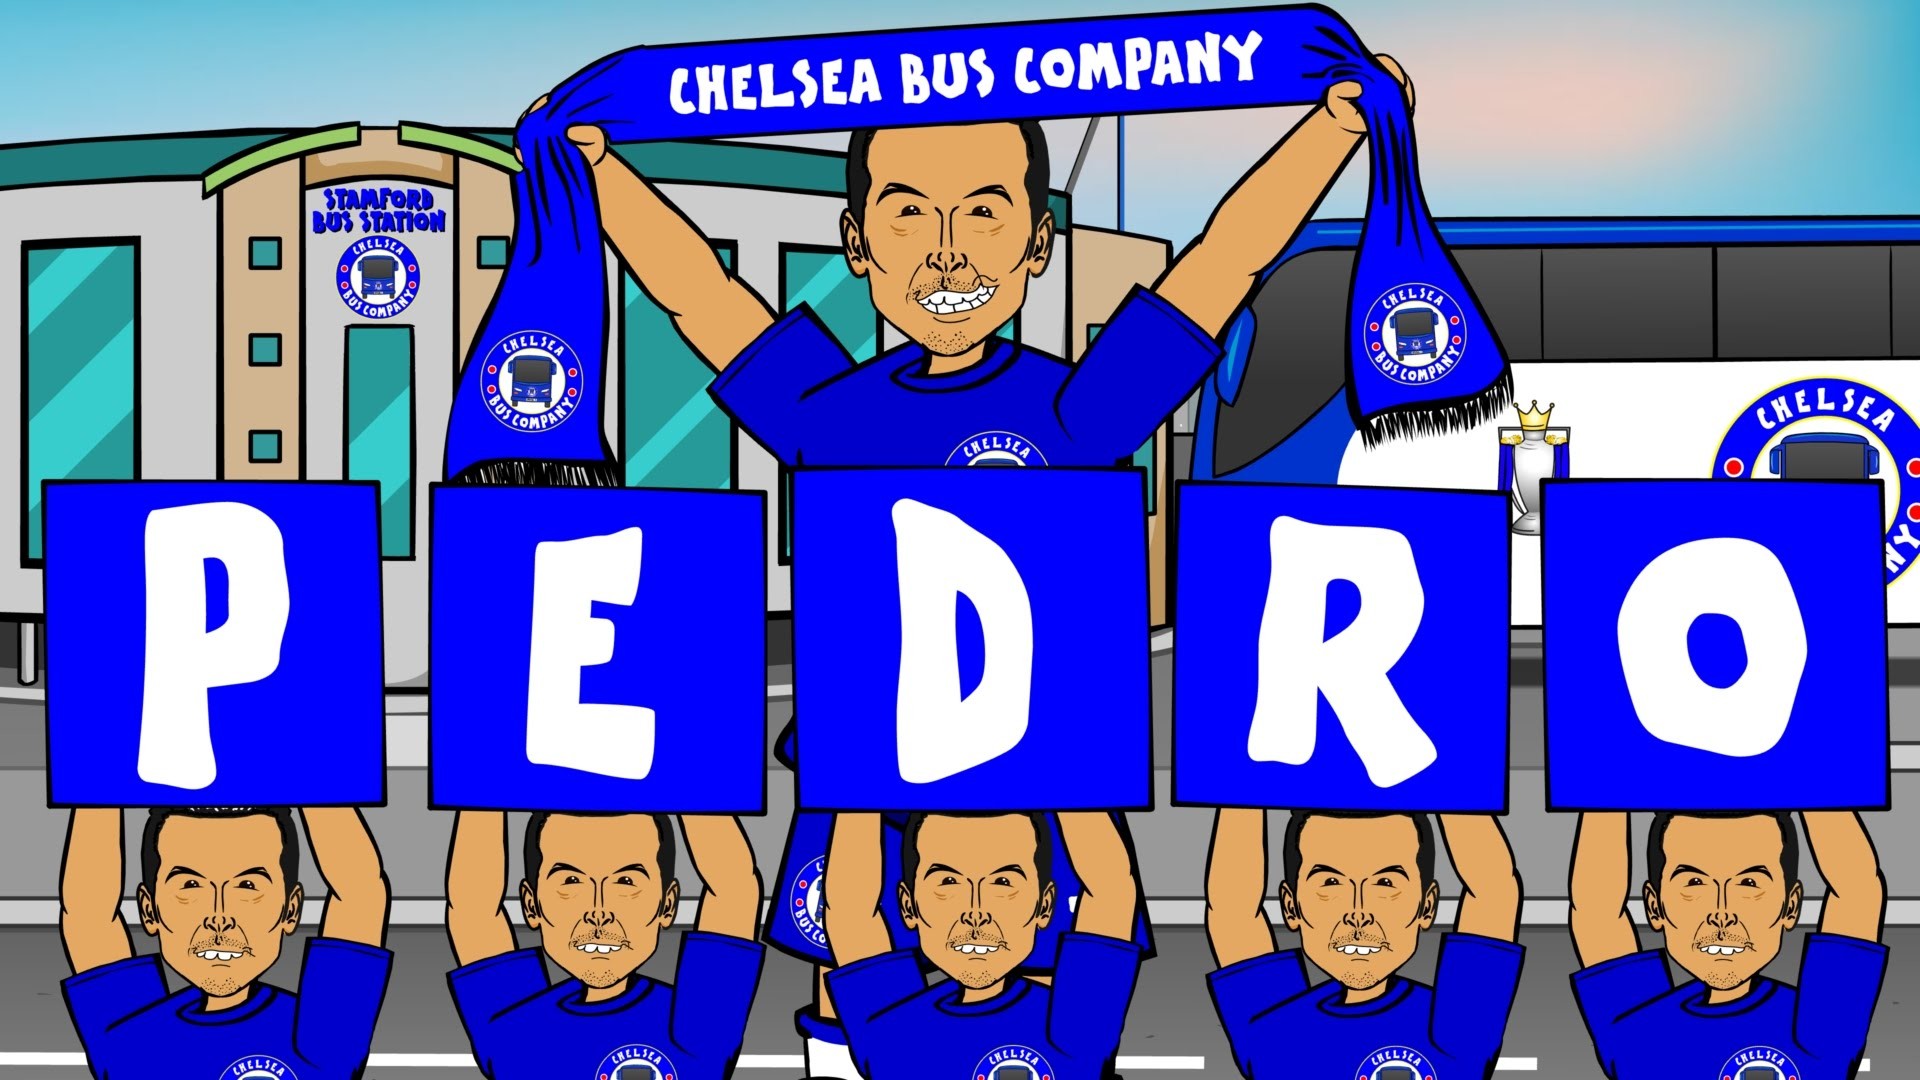 1920x1080 THE PEDRO STORY Pedro is my Name-O song (Chelsea Man Utd transfer from  Barcelona) - YouTube